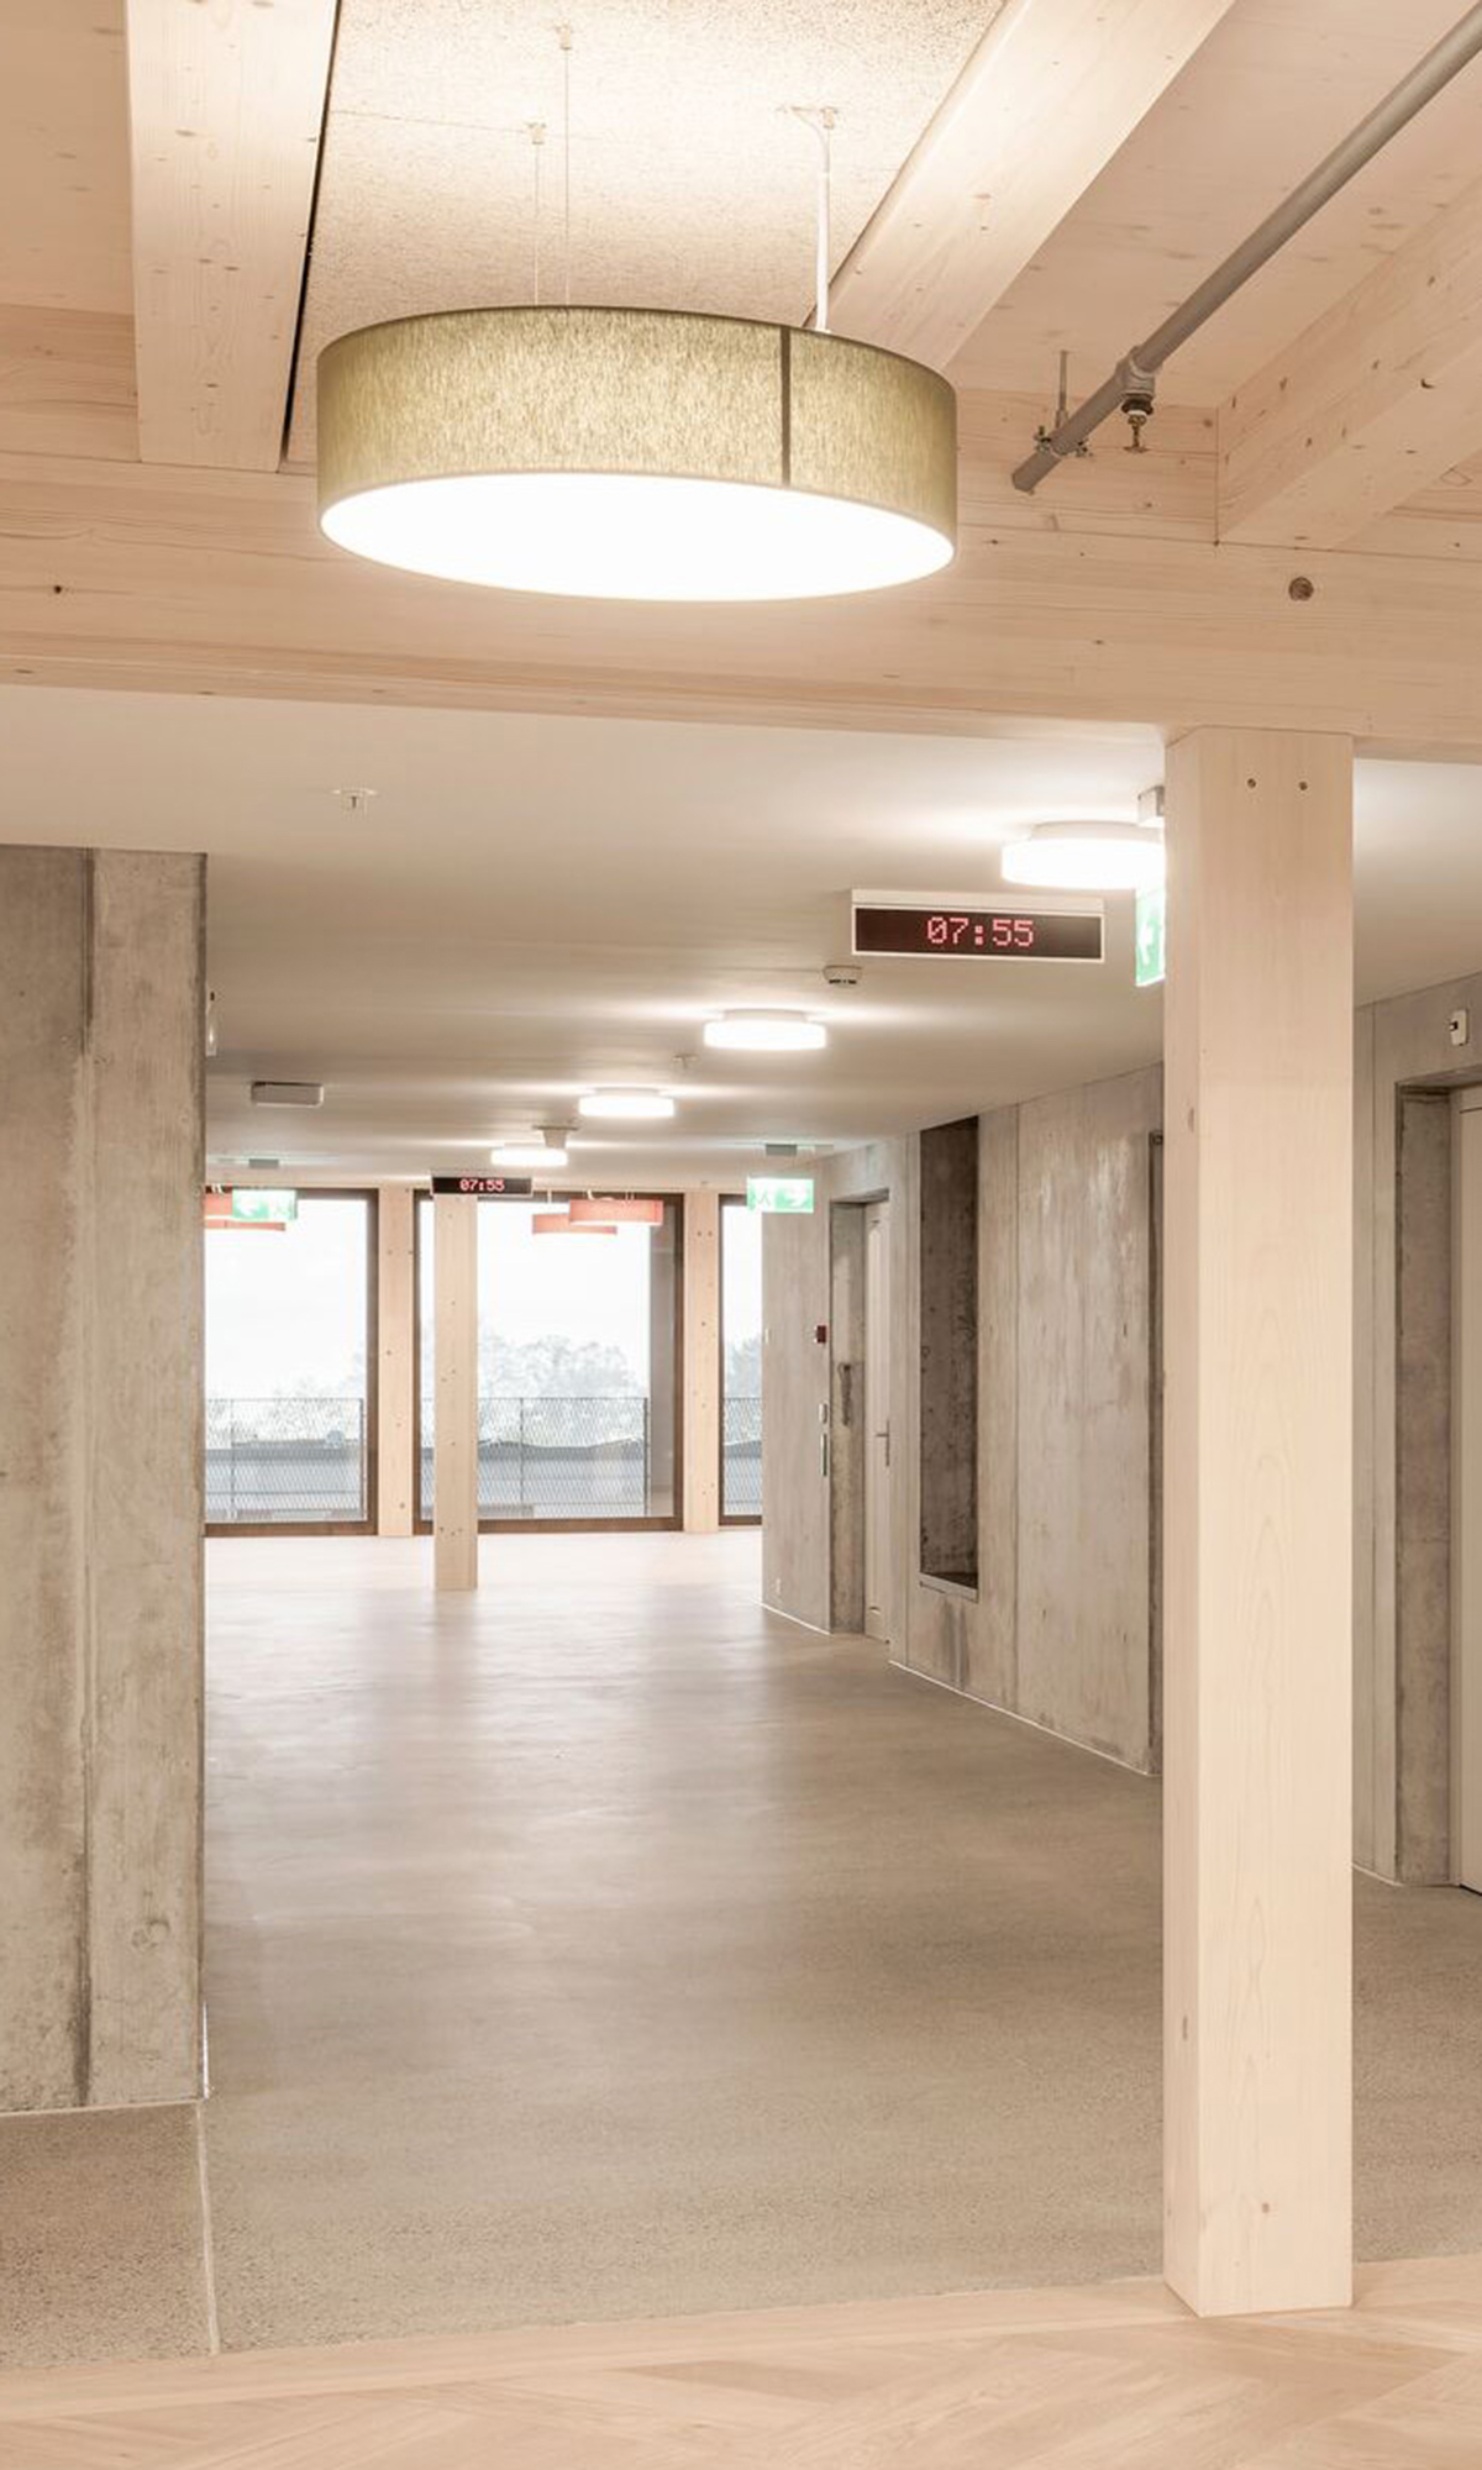 View into the corridor of the new hospital in Münsterlingen